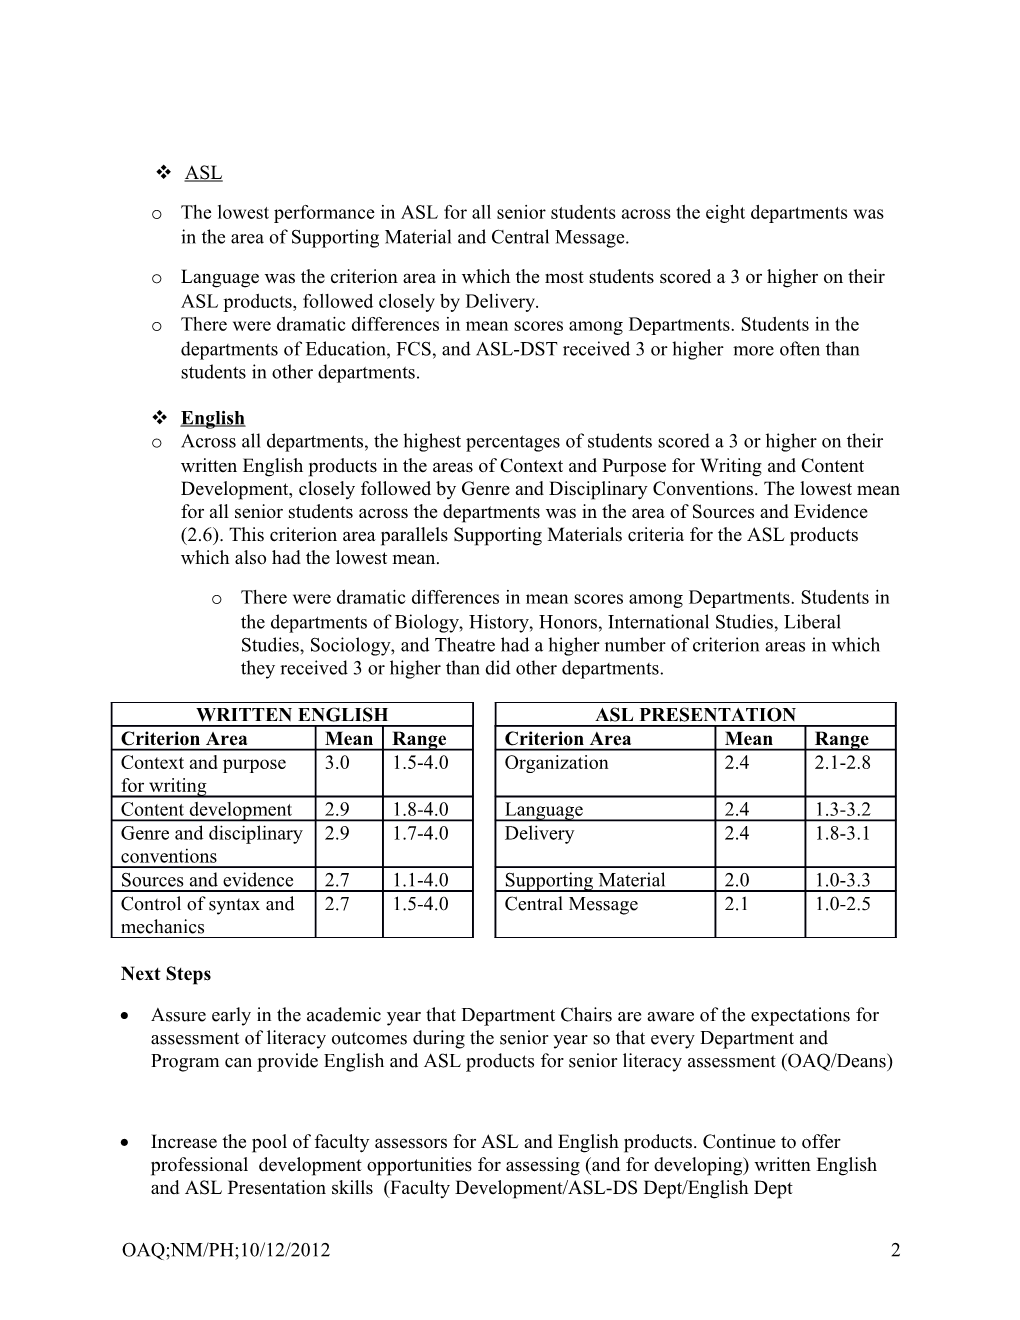 Executive Summary of the 2012 Senior Literacy Assessment